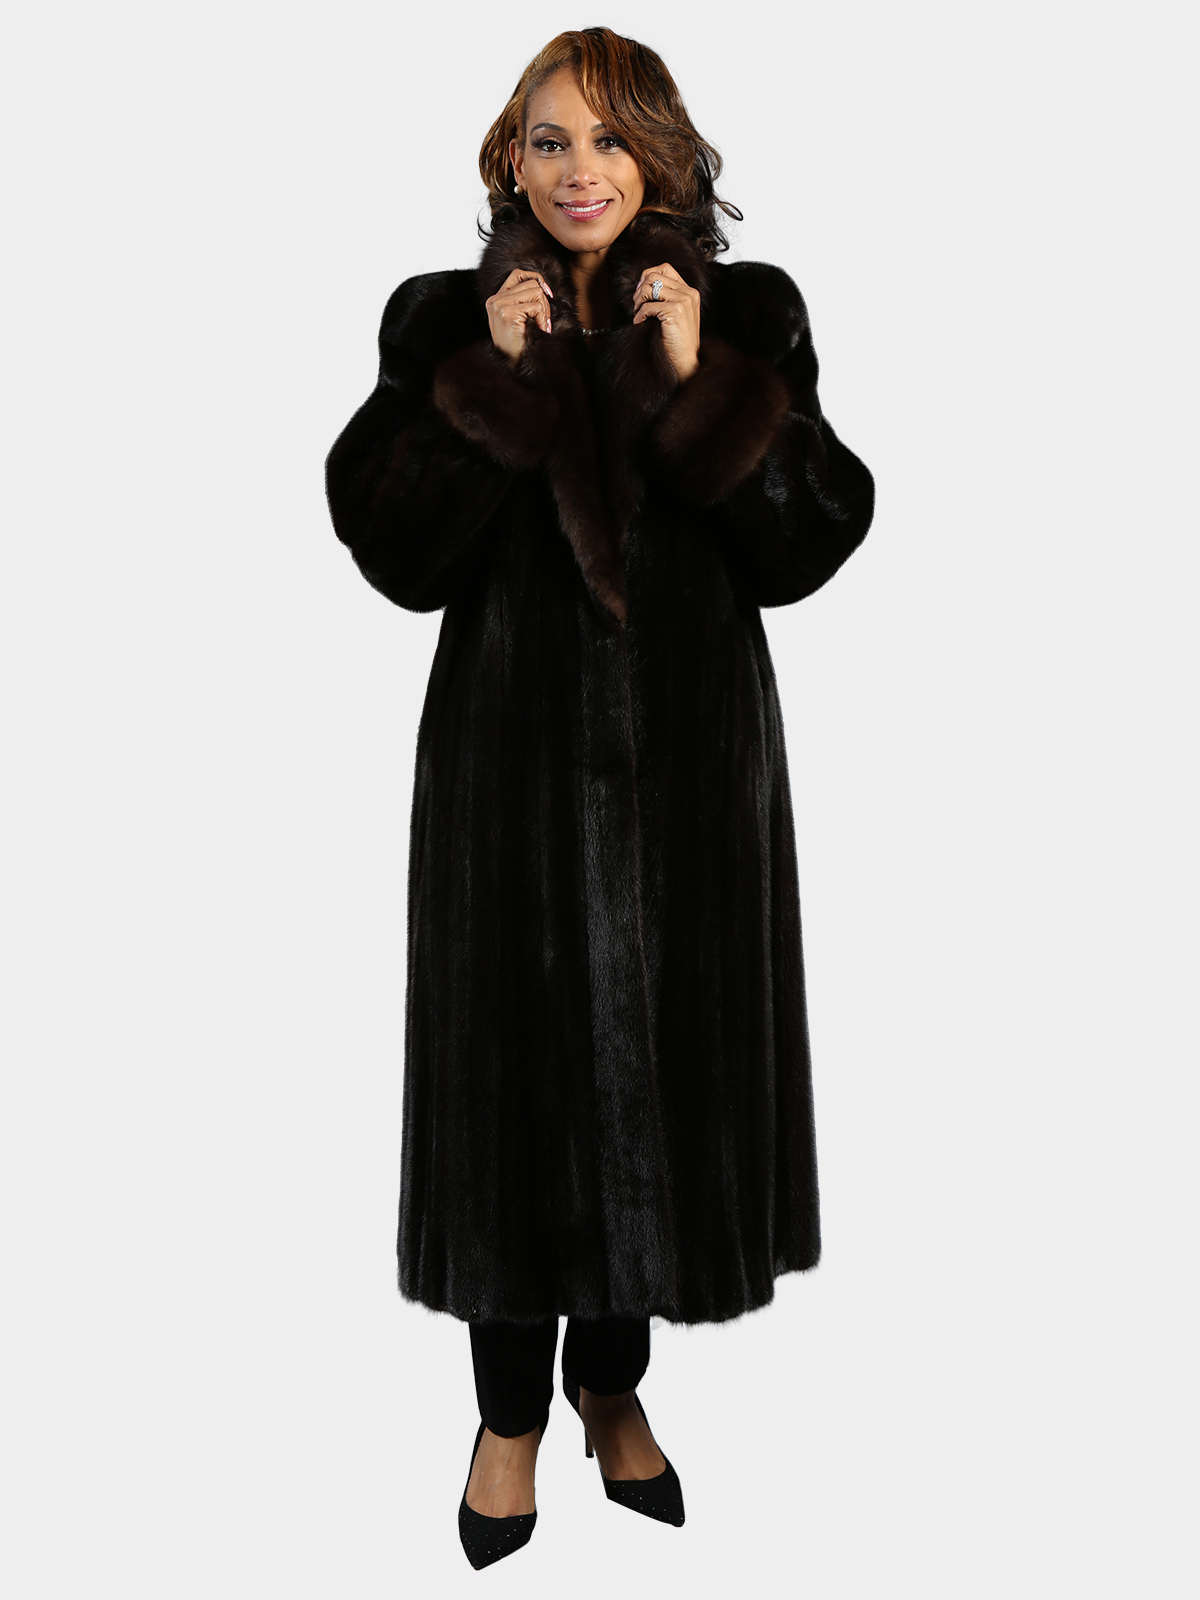 Woman's Ranch Female Mink Fur Coat with Sable Collar and Cuffs